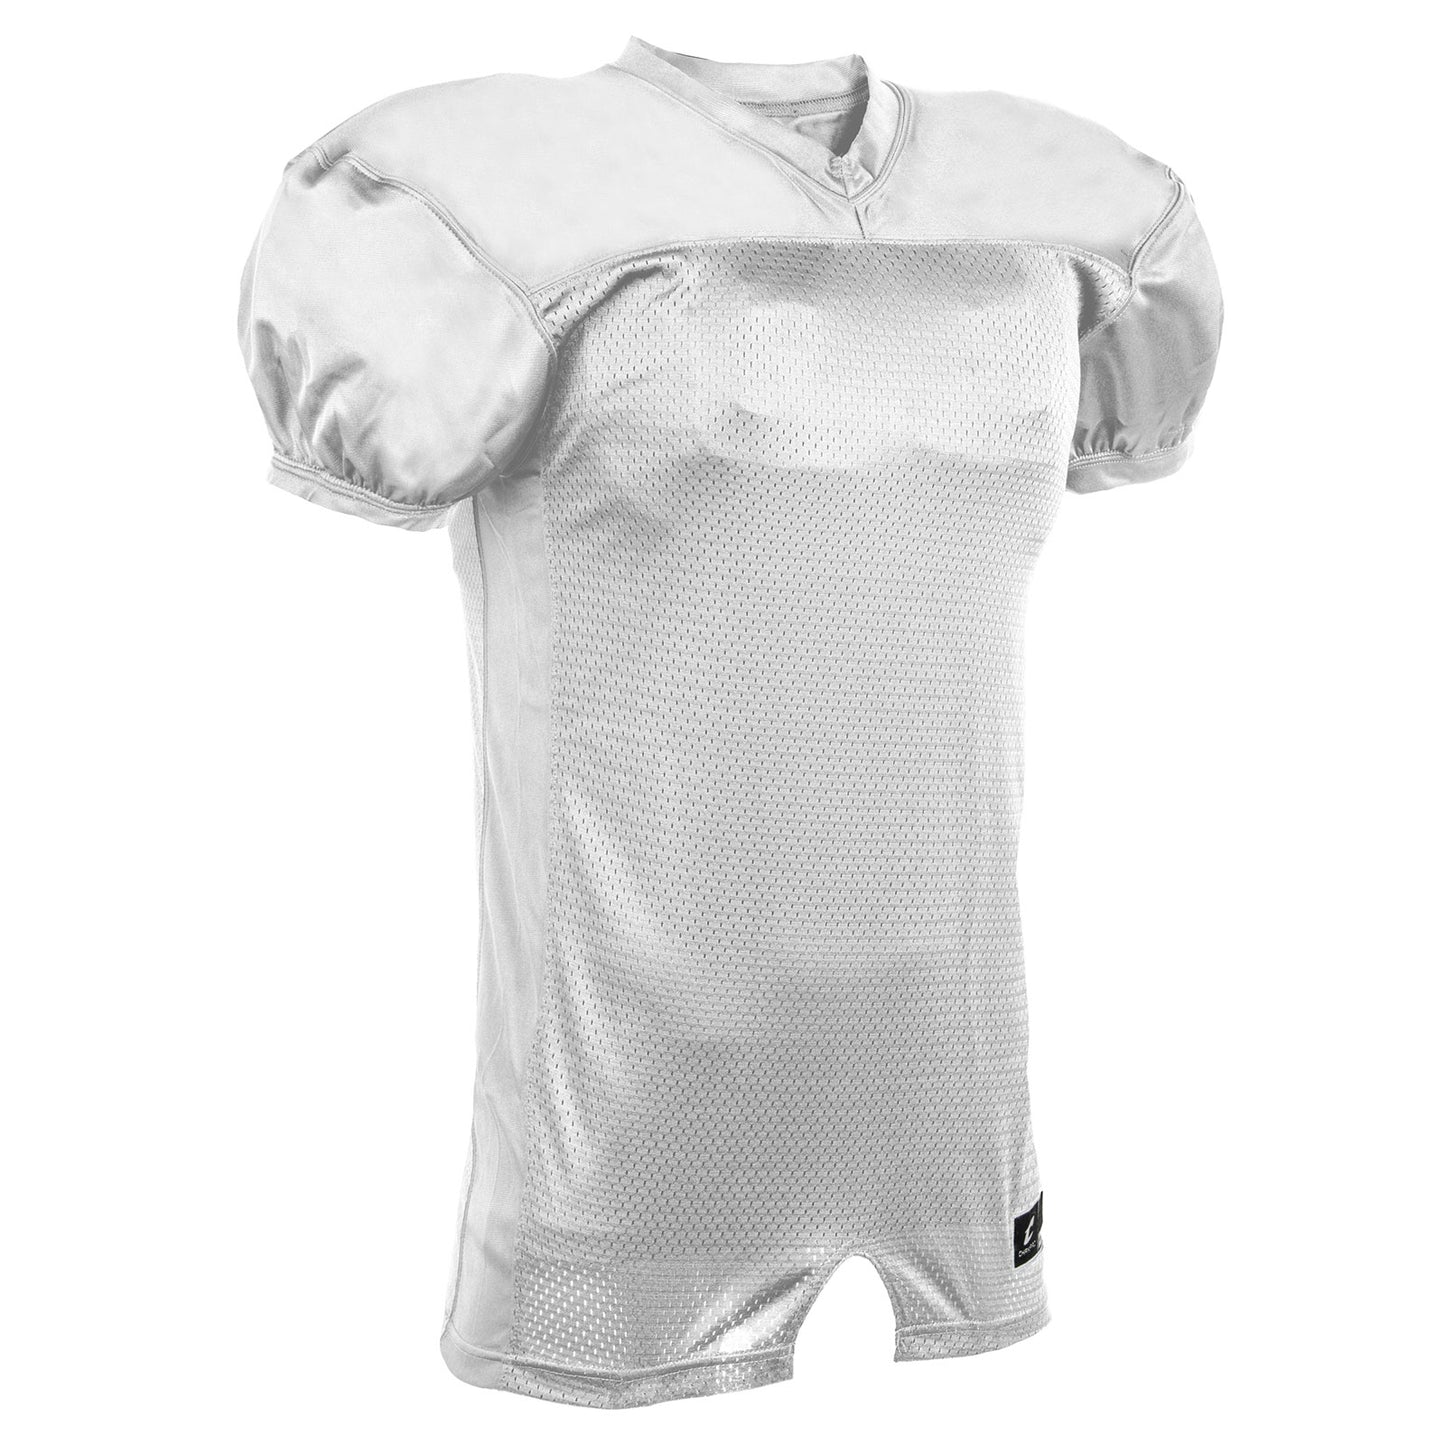 Pro Game Stretch Mesh Solid Football Jersey WHITE BODY